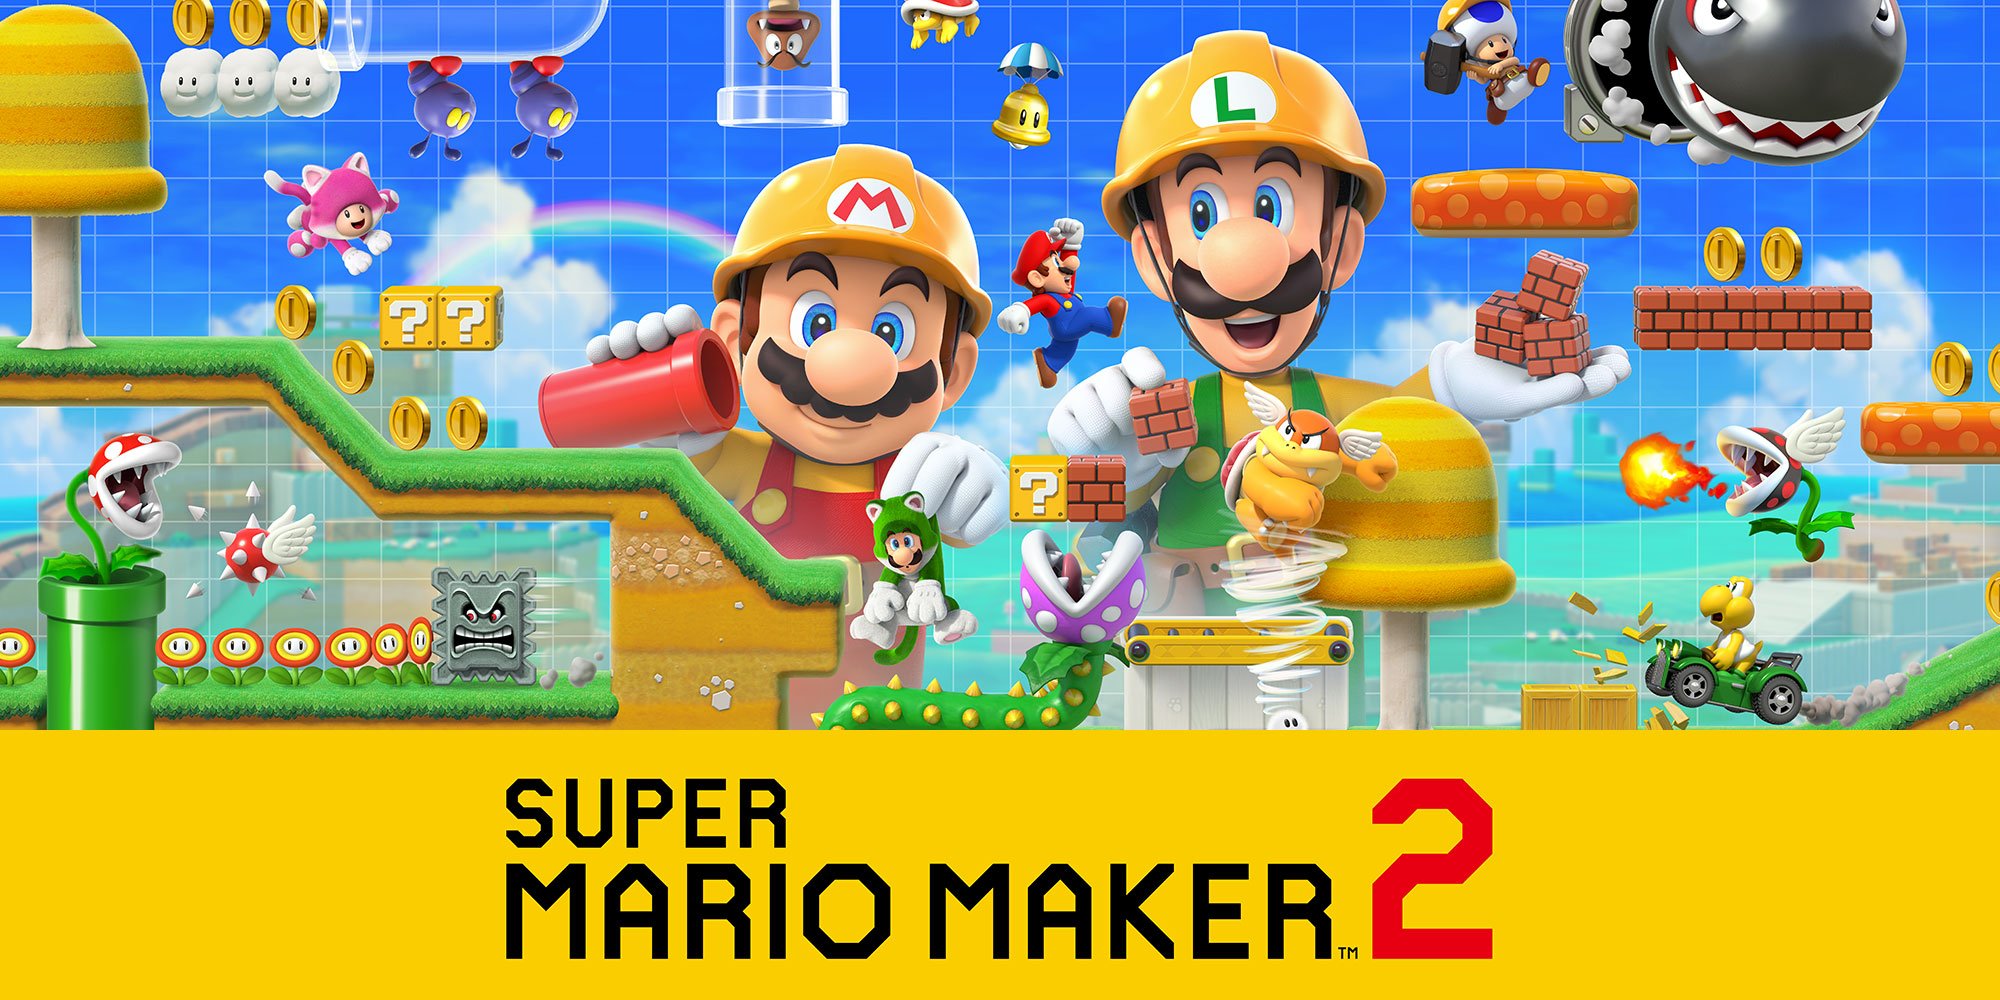 New super mario maker 2 na bgs 2019 | h2x1 nswitch supermariomaker2 1 | quantum | mario maker 2 quantum